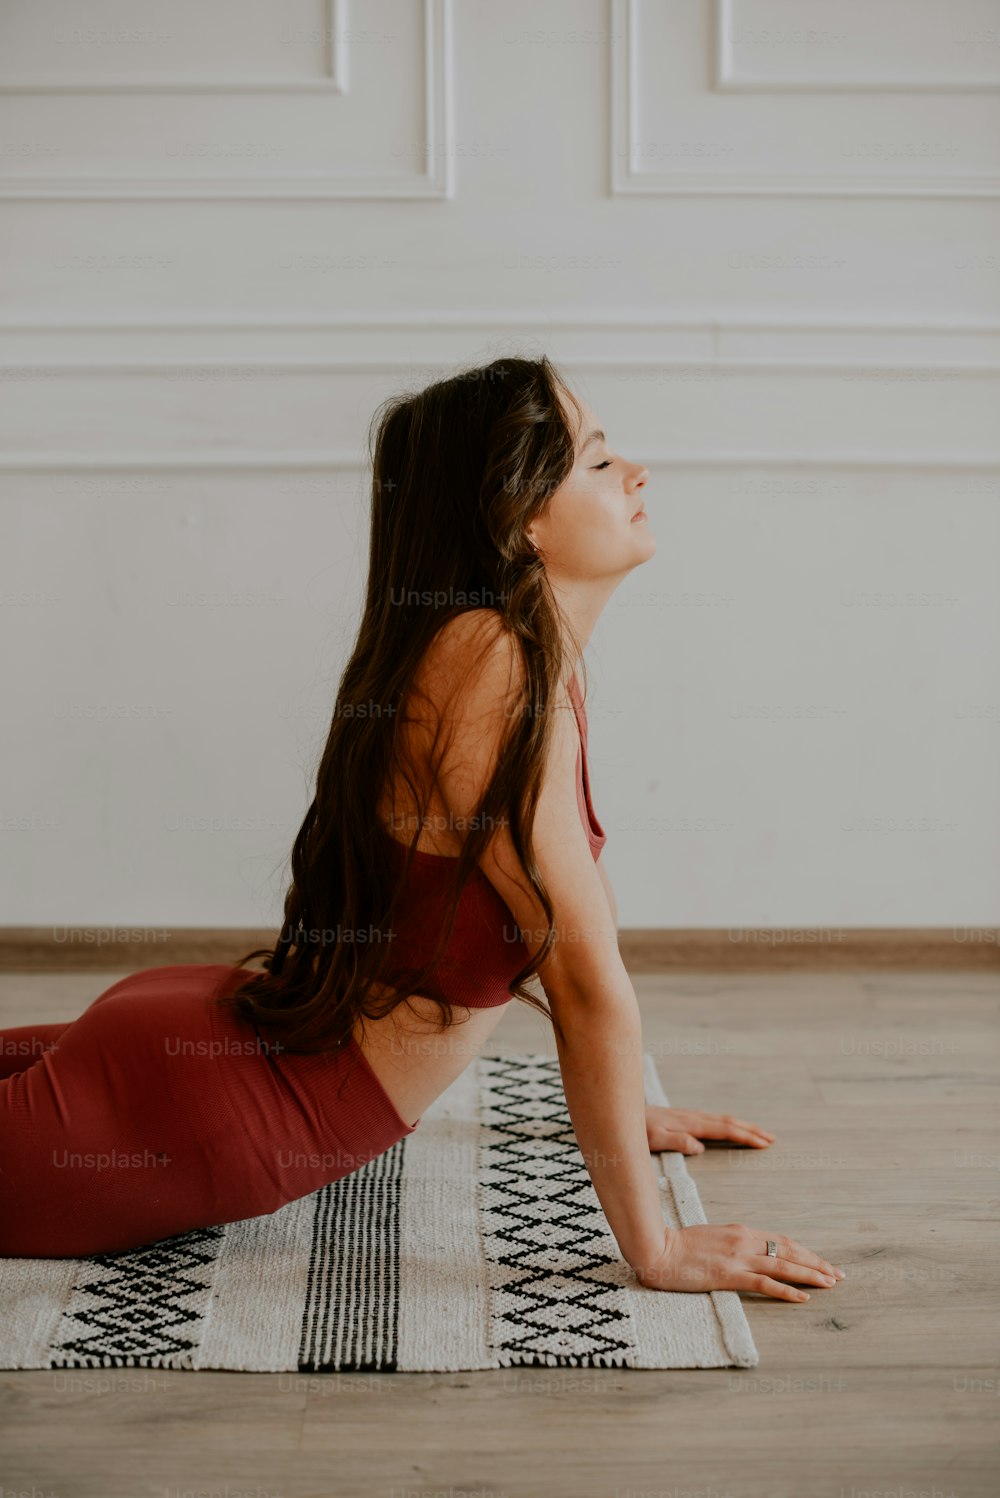 a woman in a red top is doing yoga